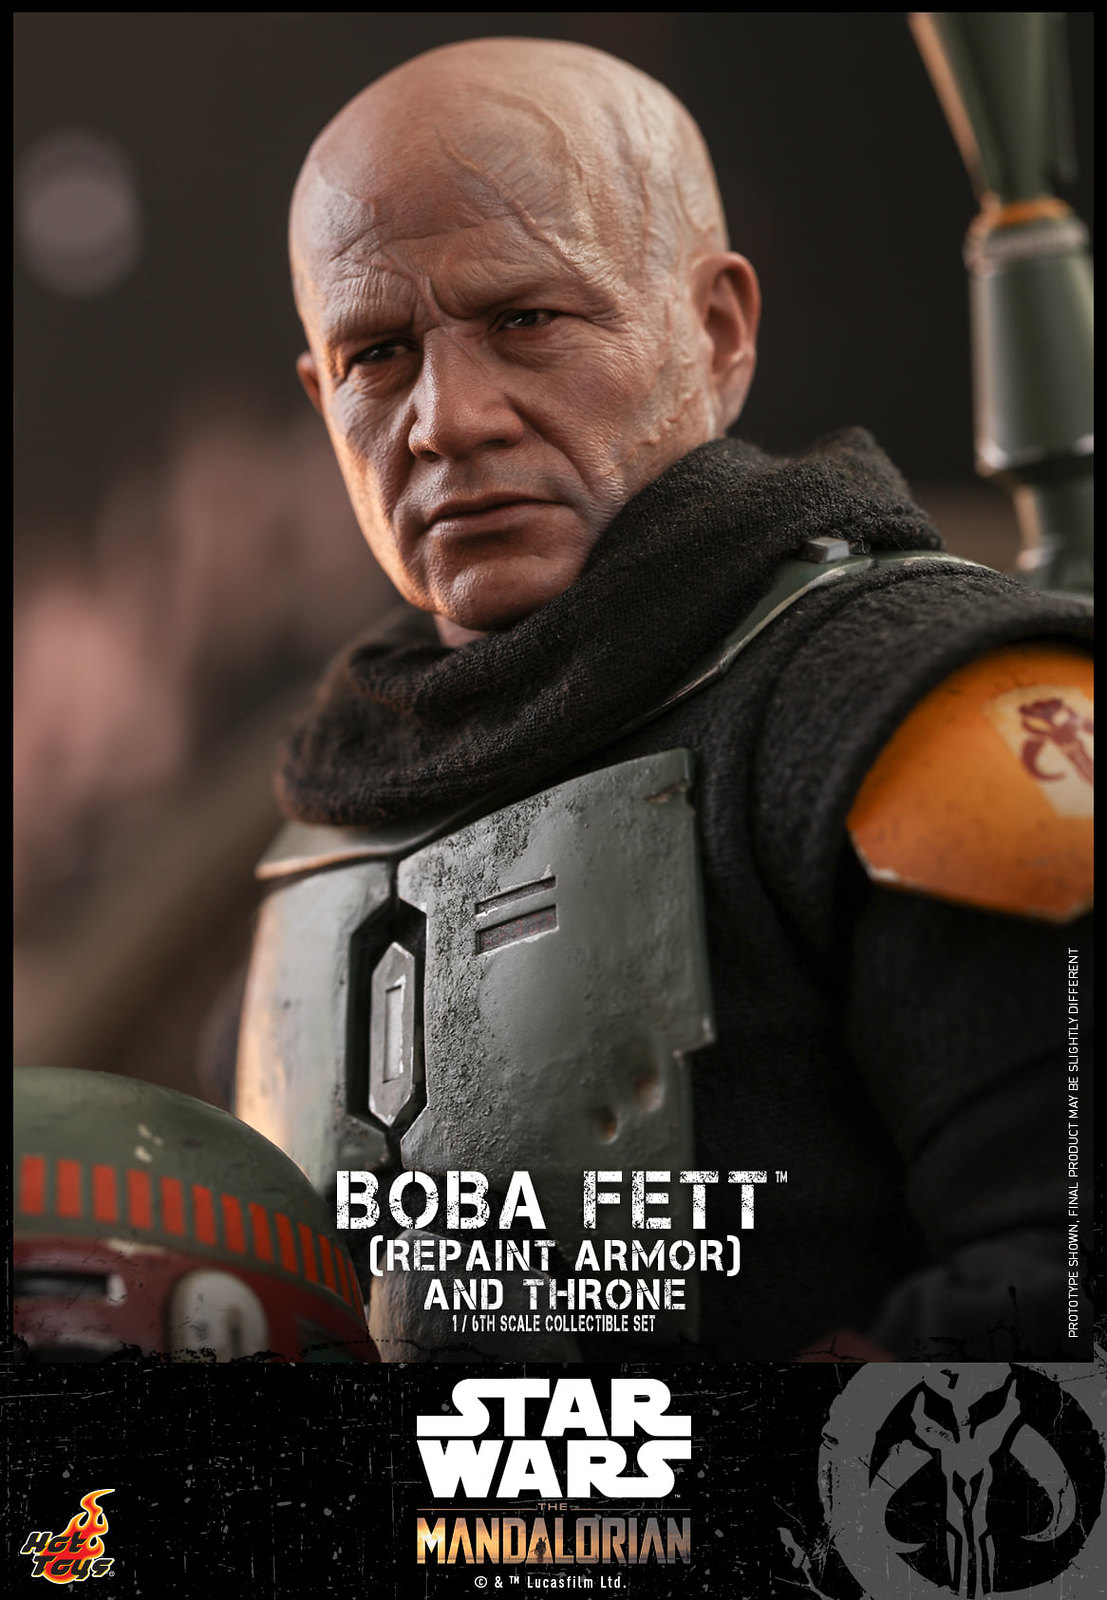 Star Wars: The Mandalorian™ - 1/6th scale Boba Fett™ (Repaint Armor) Collectible figure/ figure and Throne Collectible Set 51312018814_8a2acc9cd7_h